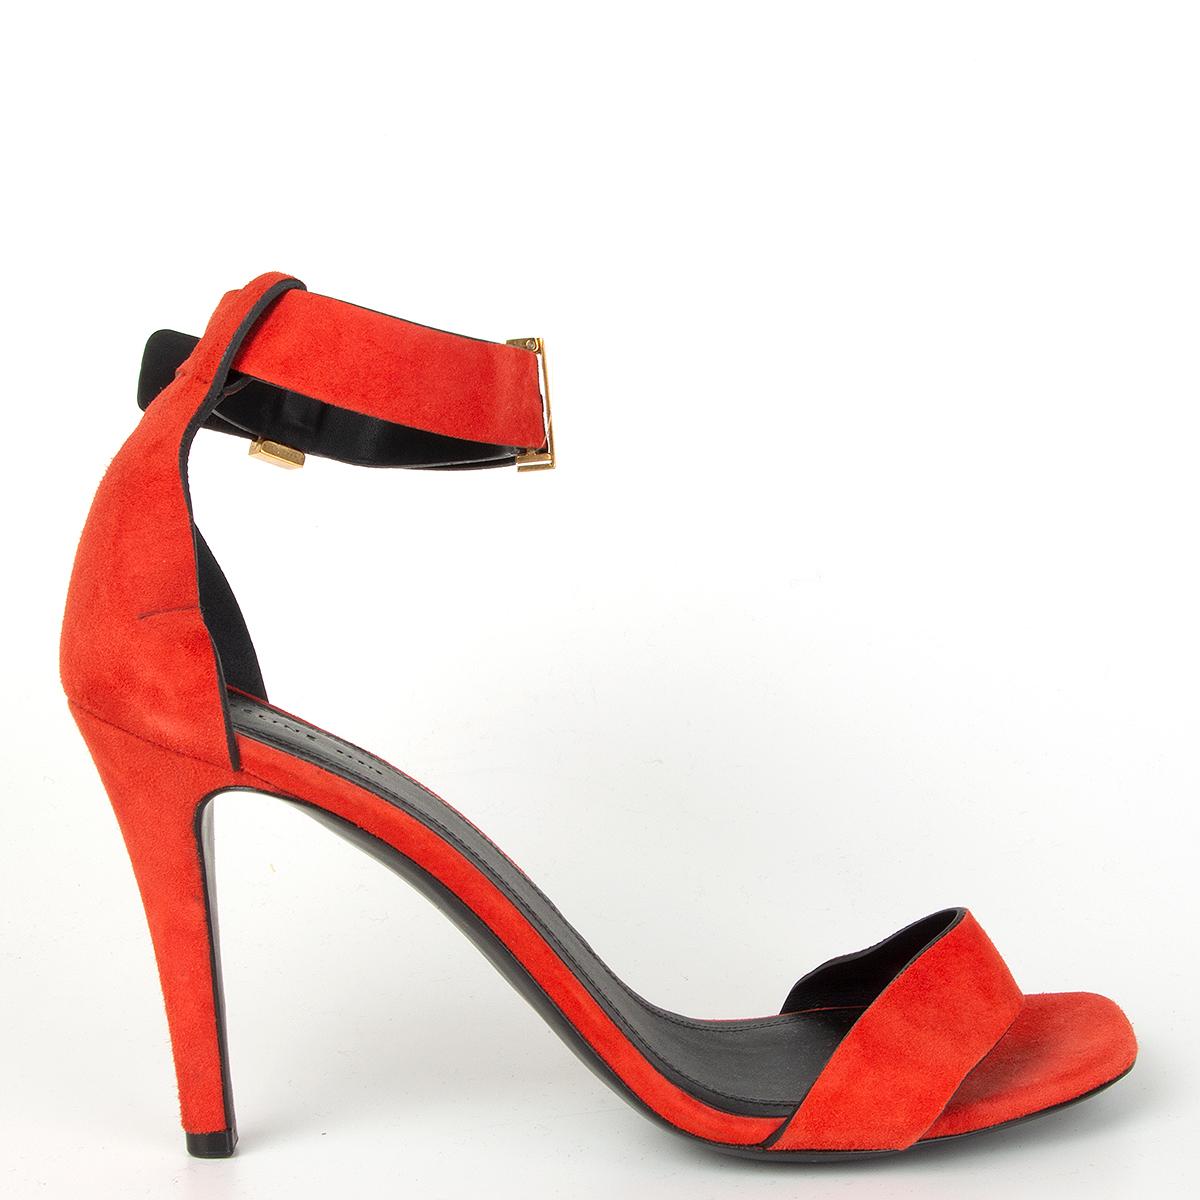 100% authentic CCéline ankle-strap sandals in red suede with antique gold-tone closure on the side. Bradn new. Come with dust bag. 

Measurements
Imprinted Size	38.5
Shoe Size	38.5
Inside Sole	25cm (9.8in)
Width	8cm (3.1in)
Heel	9cm